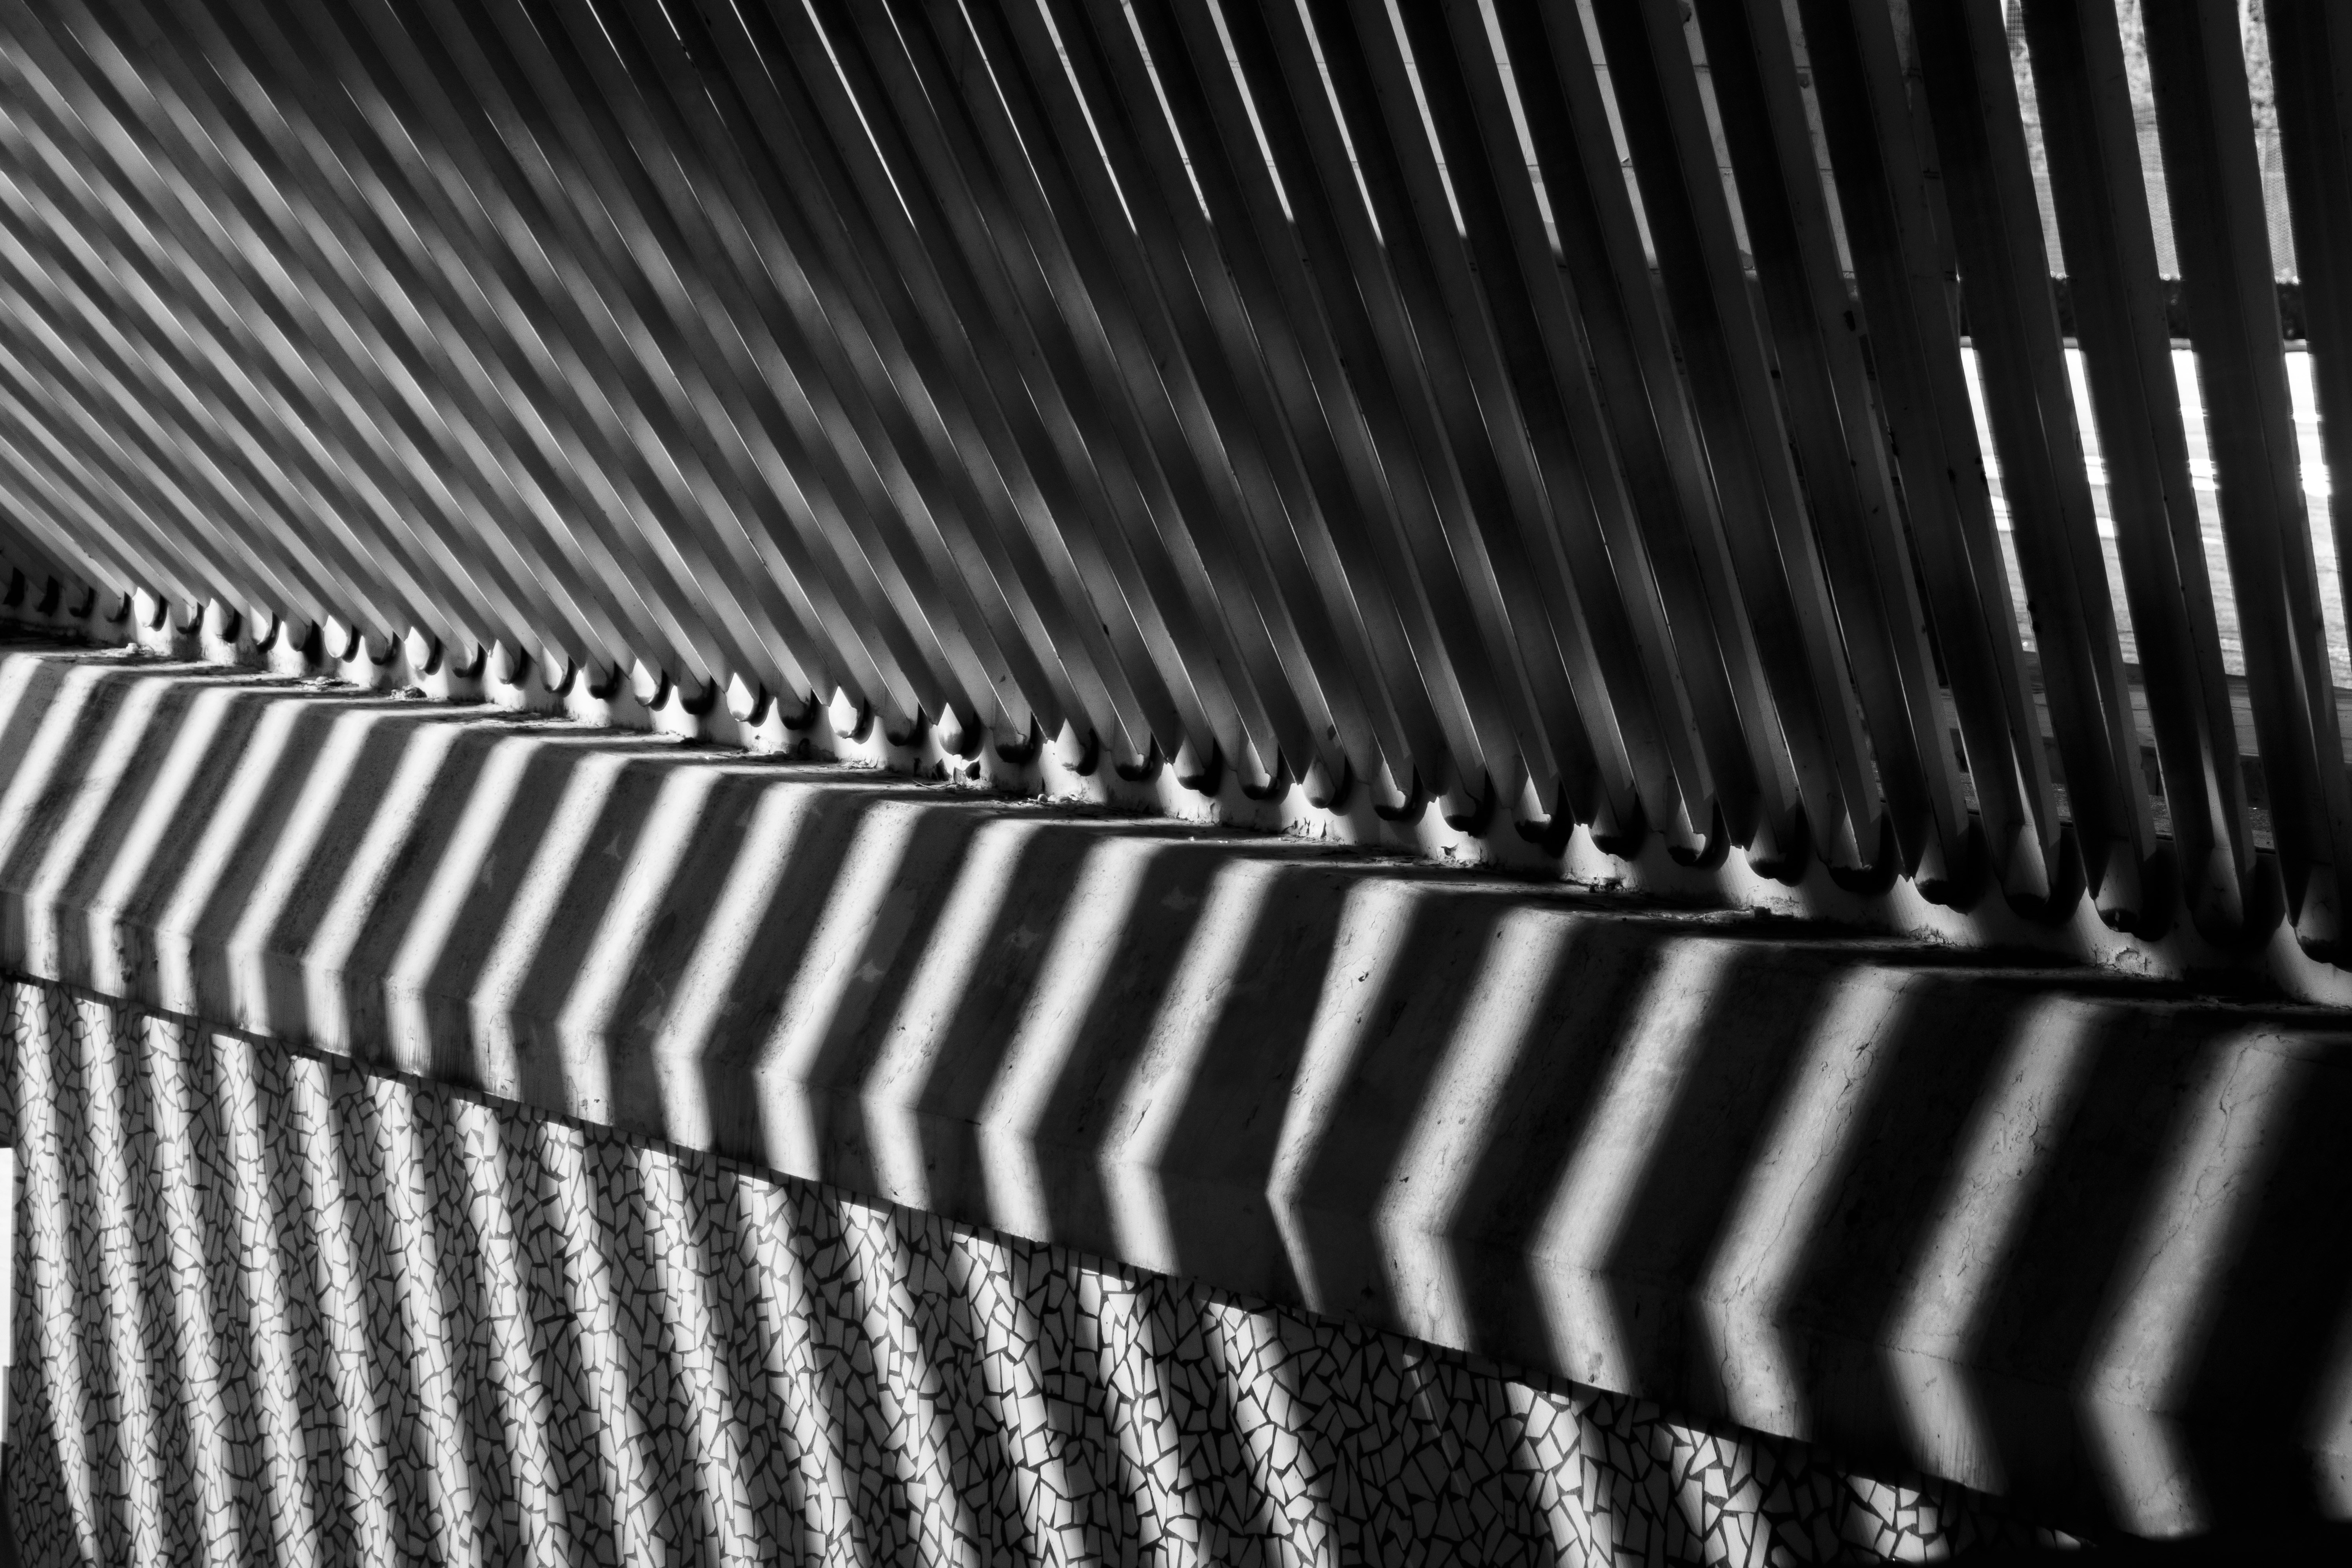 Photo made in the City of Arts and Sciences, Spain. Black and white.